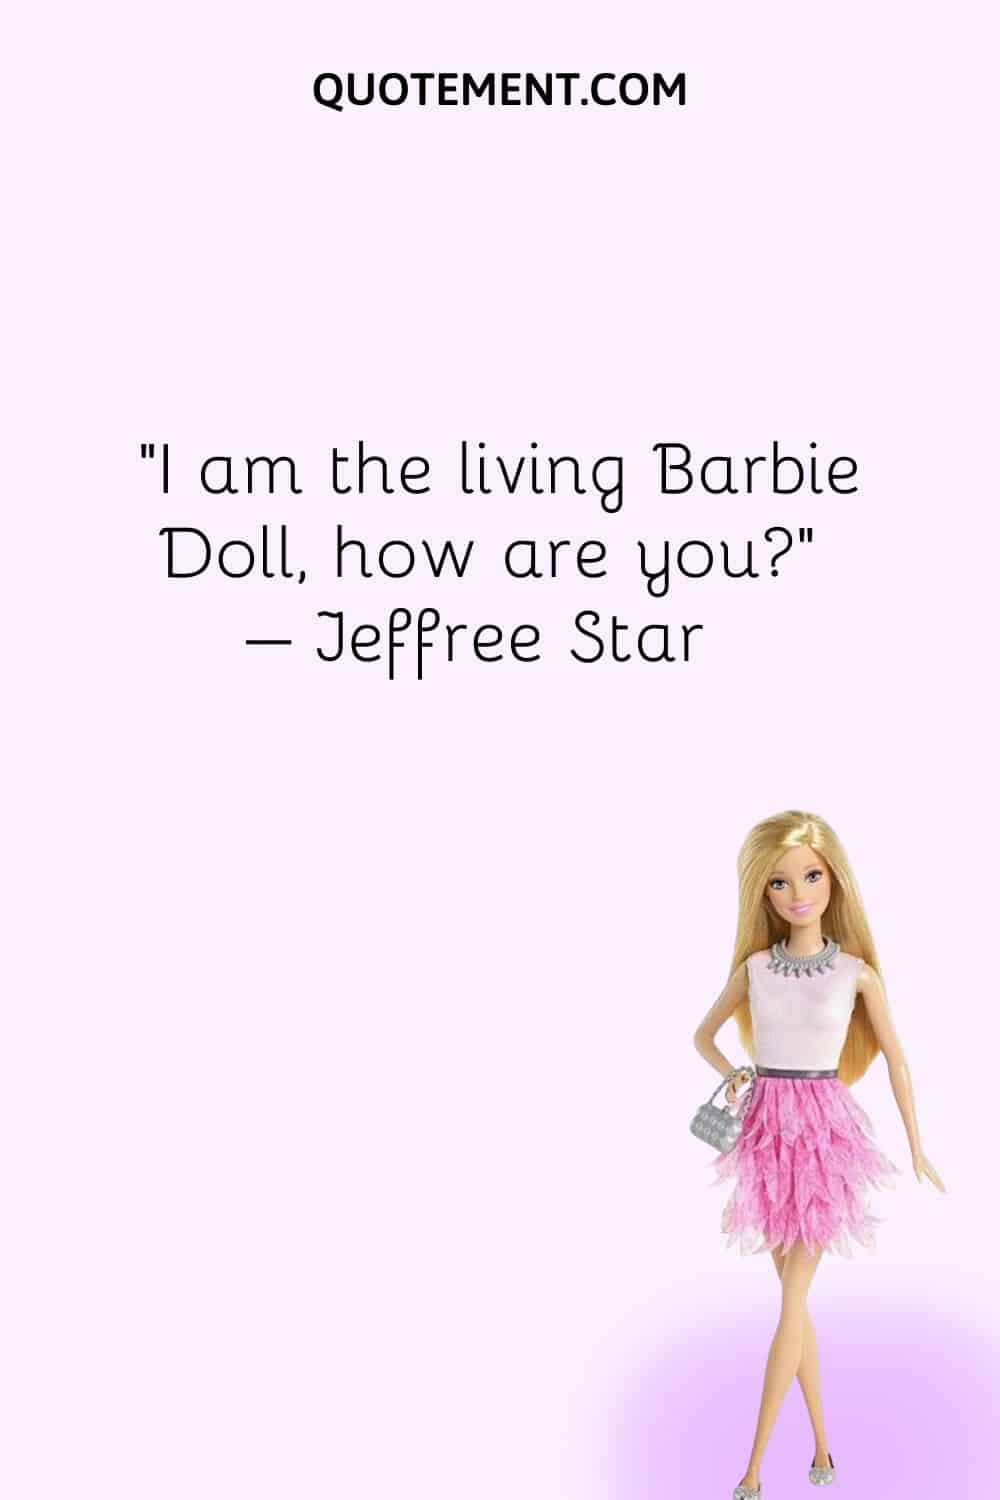 I am the living Barbie Doll, how are you